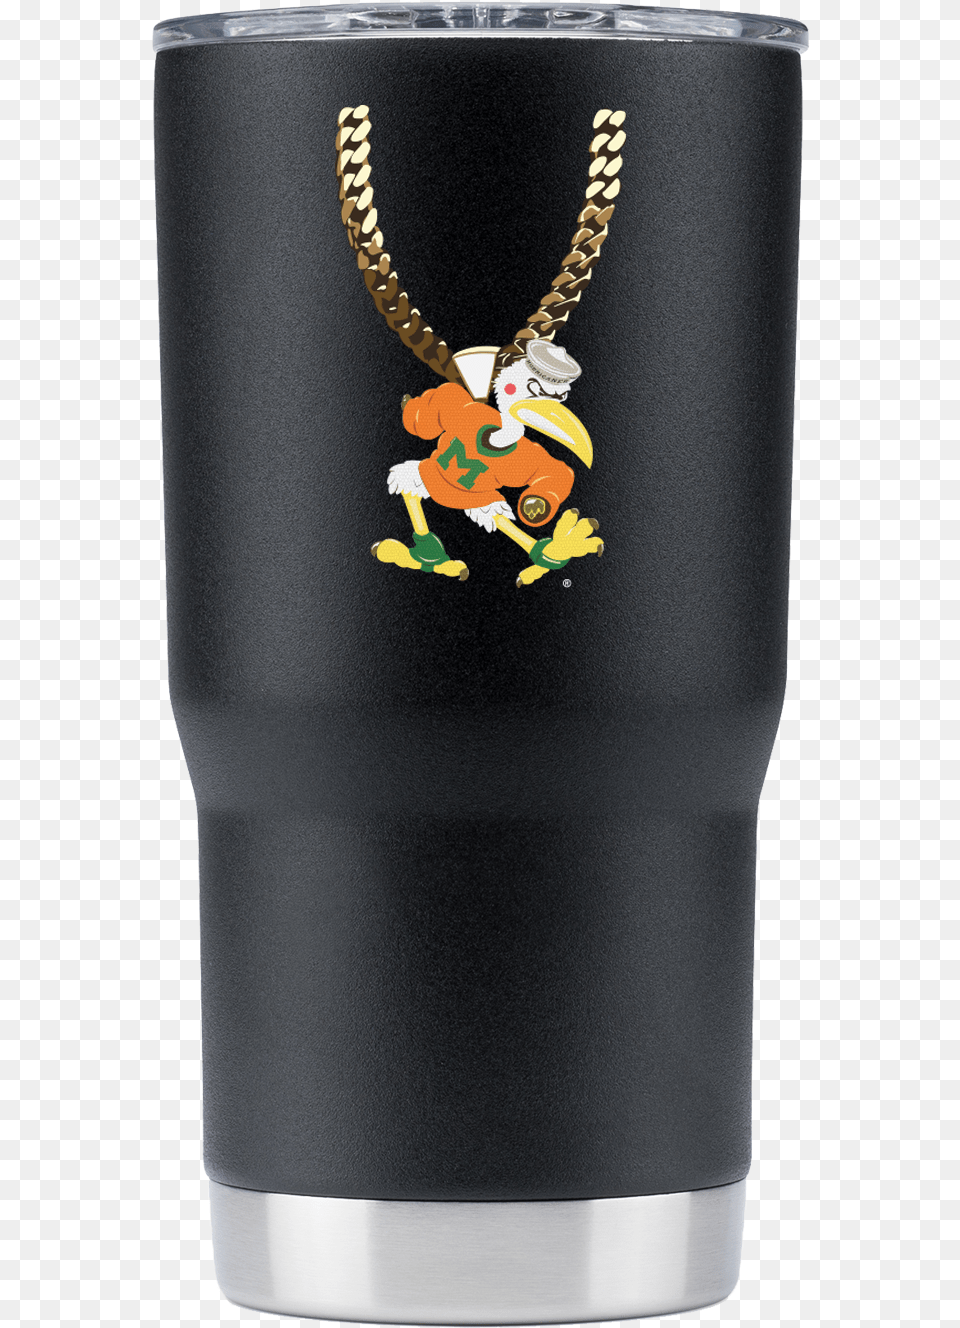 Miami 20 Oz Black To Chain Tumbler Pint Glass, Accessories, Jewelry, Necklace Png Image